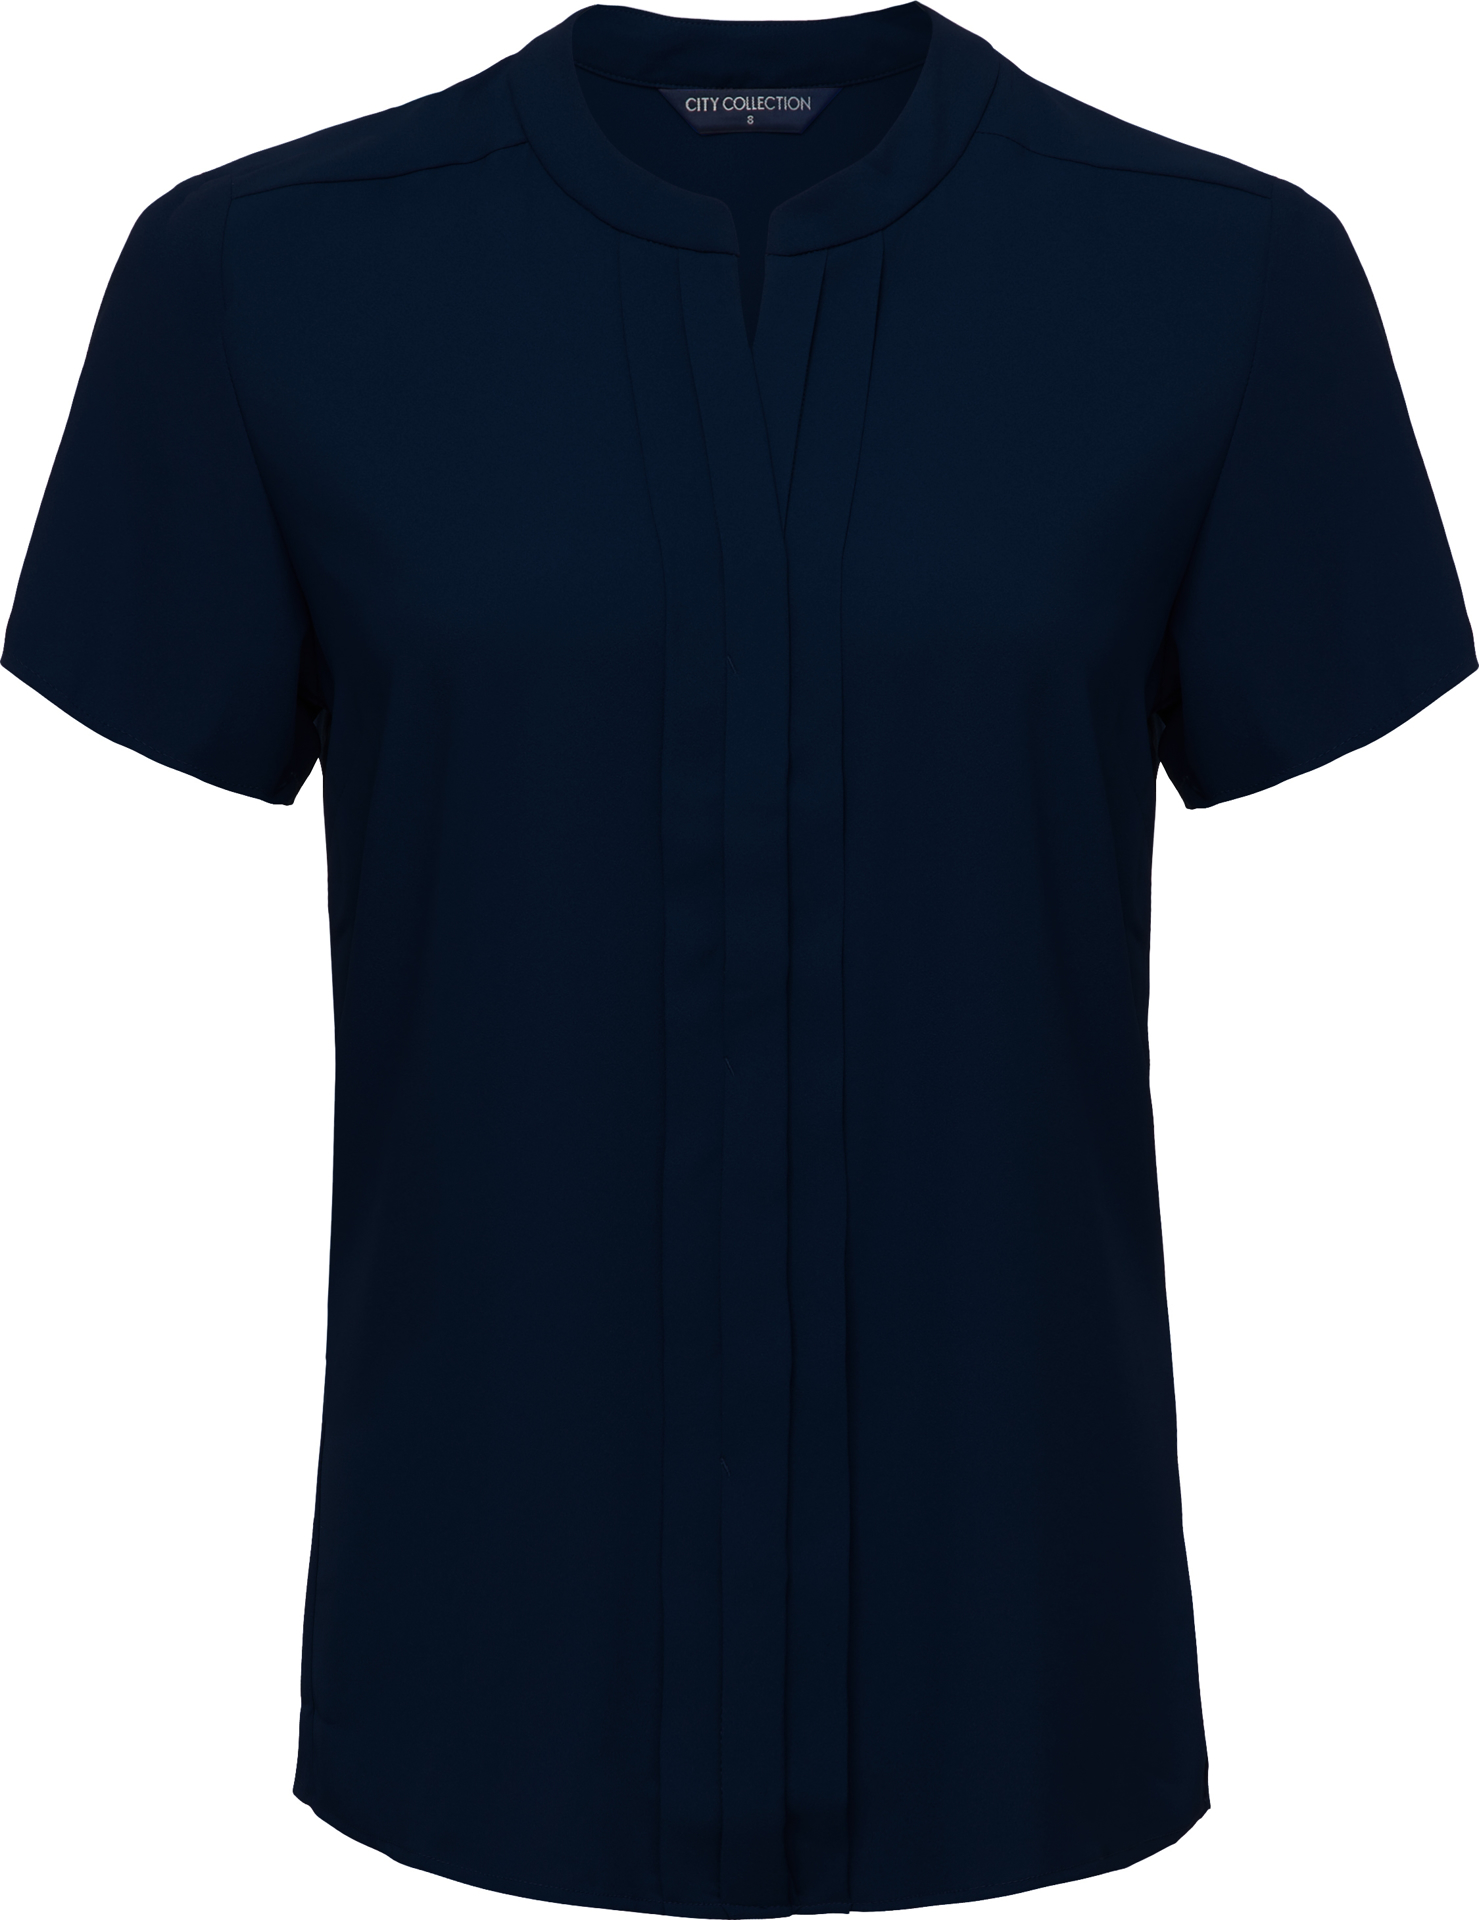 City Collection Envy Short Sleeve (2288) | Scrubs, Corporate, Workwear ...